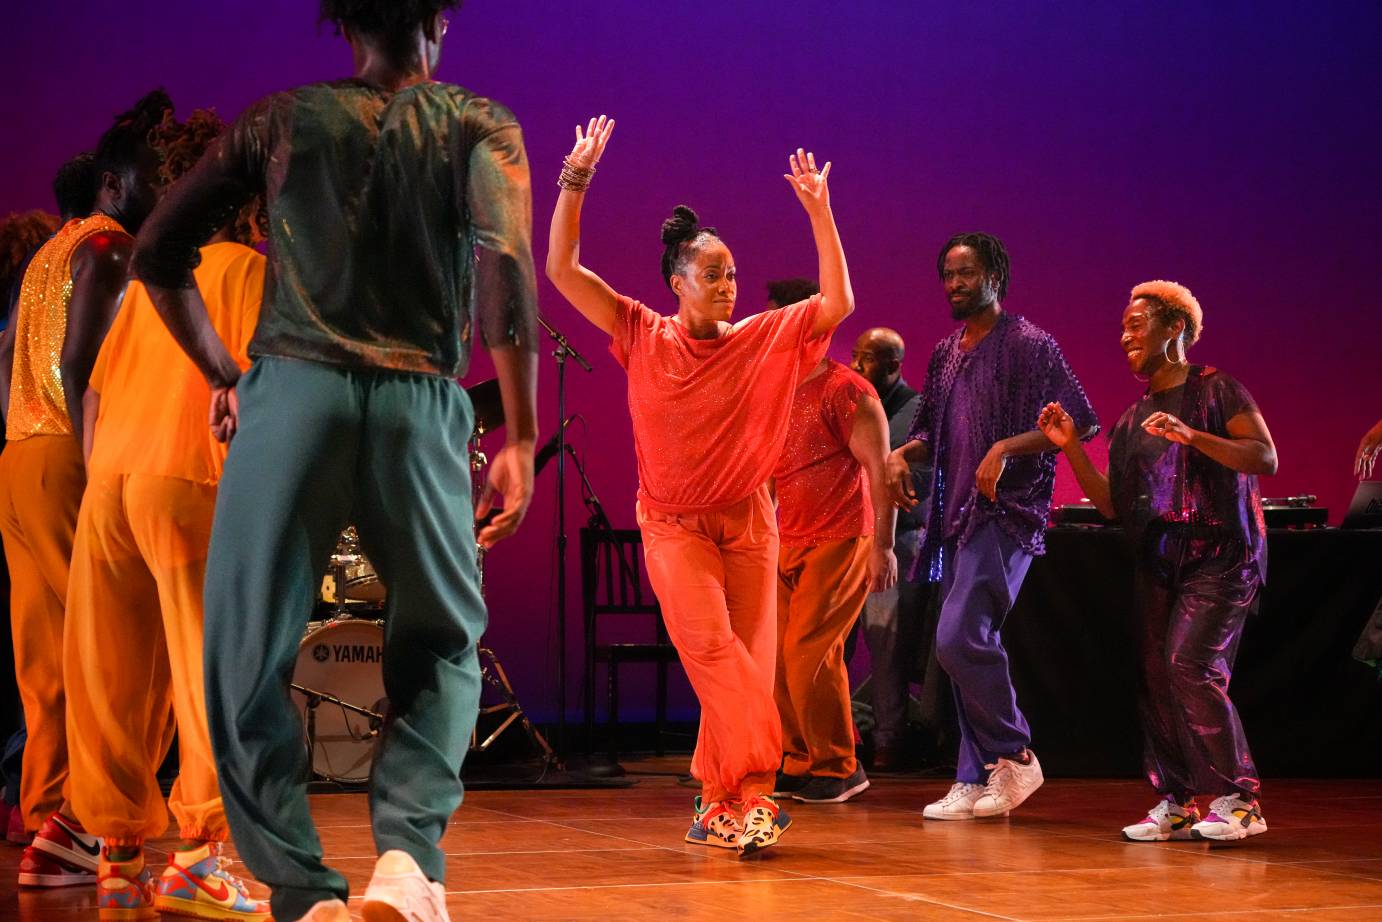 The group of Black Dancers in Rainbow colors form lines around a woman dancing in orange...